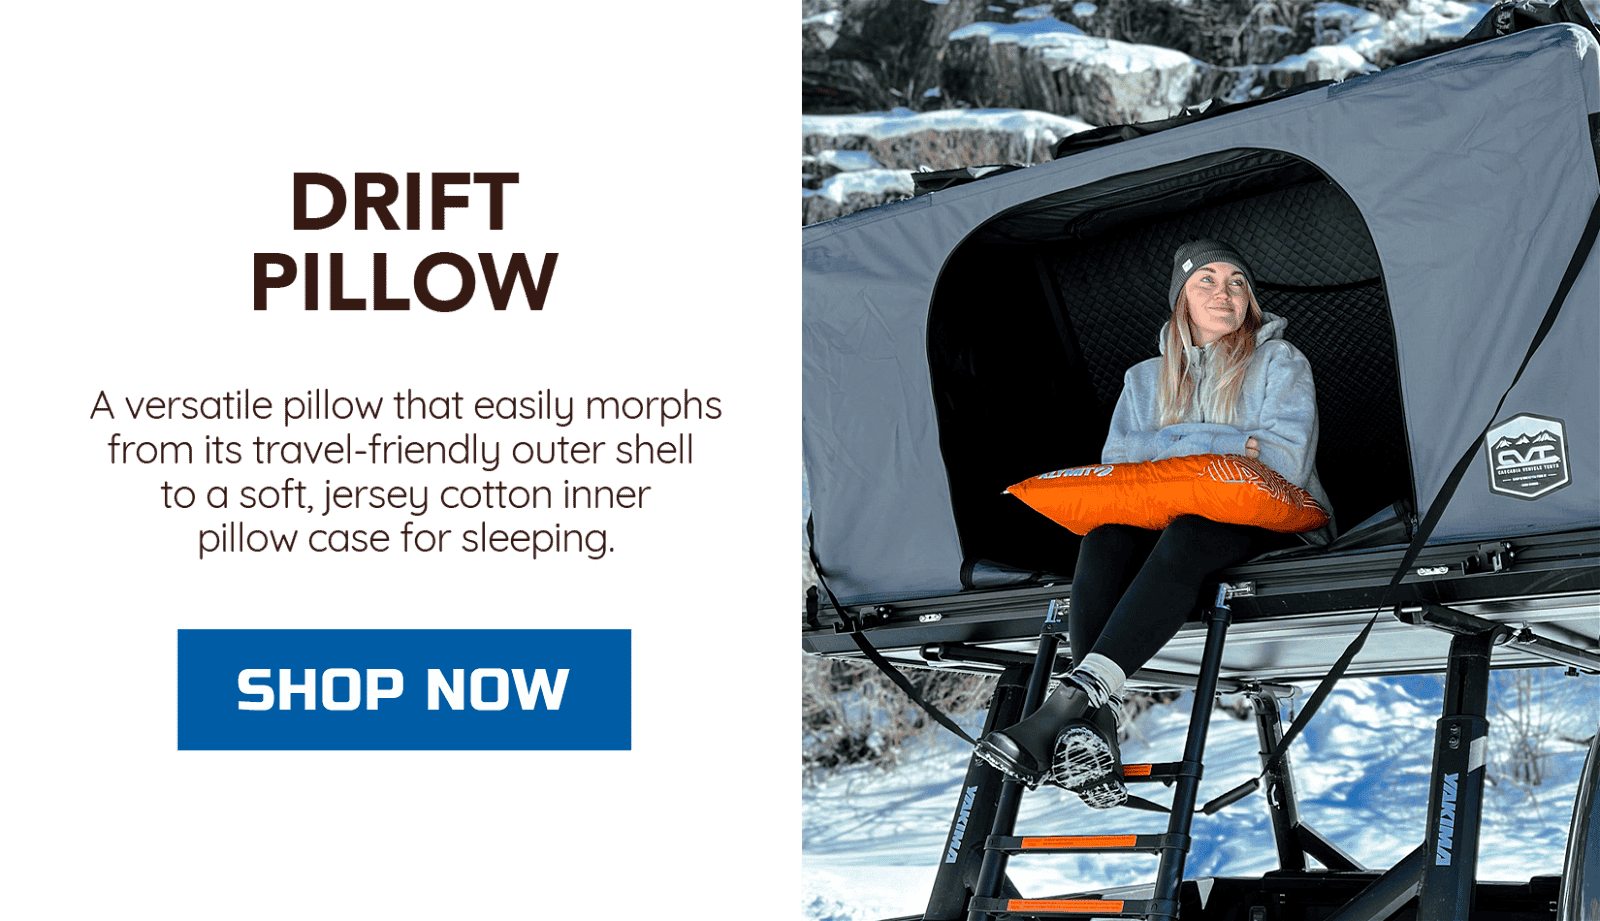 DRIFT PILLOW: A versatile pillow that easily morphs from its travel-friendly outer shell to a soft, jersey cotton inner pillow case for sleeping.